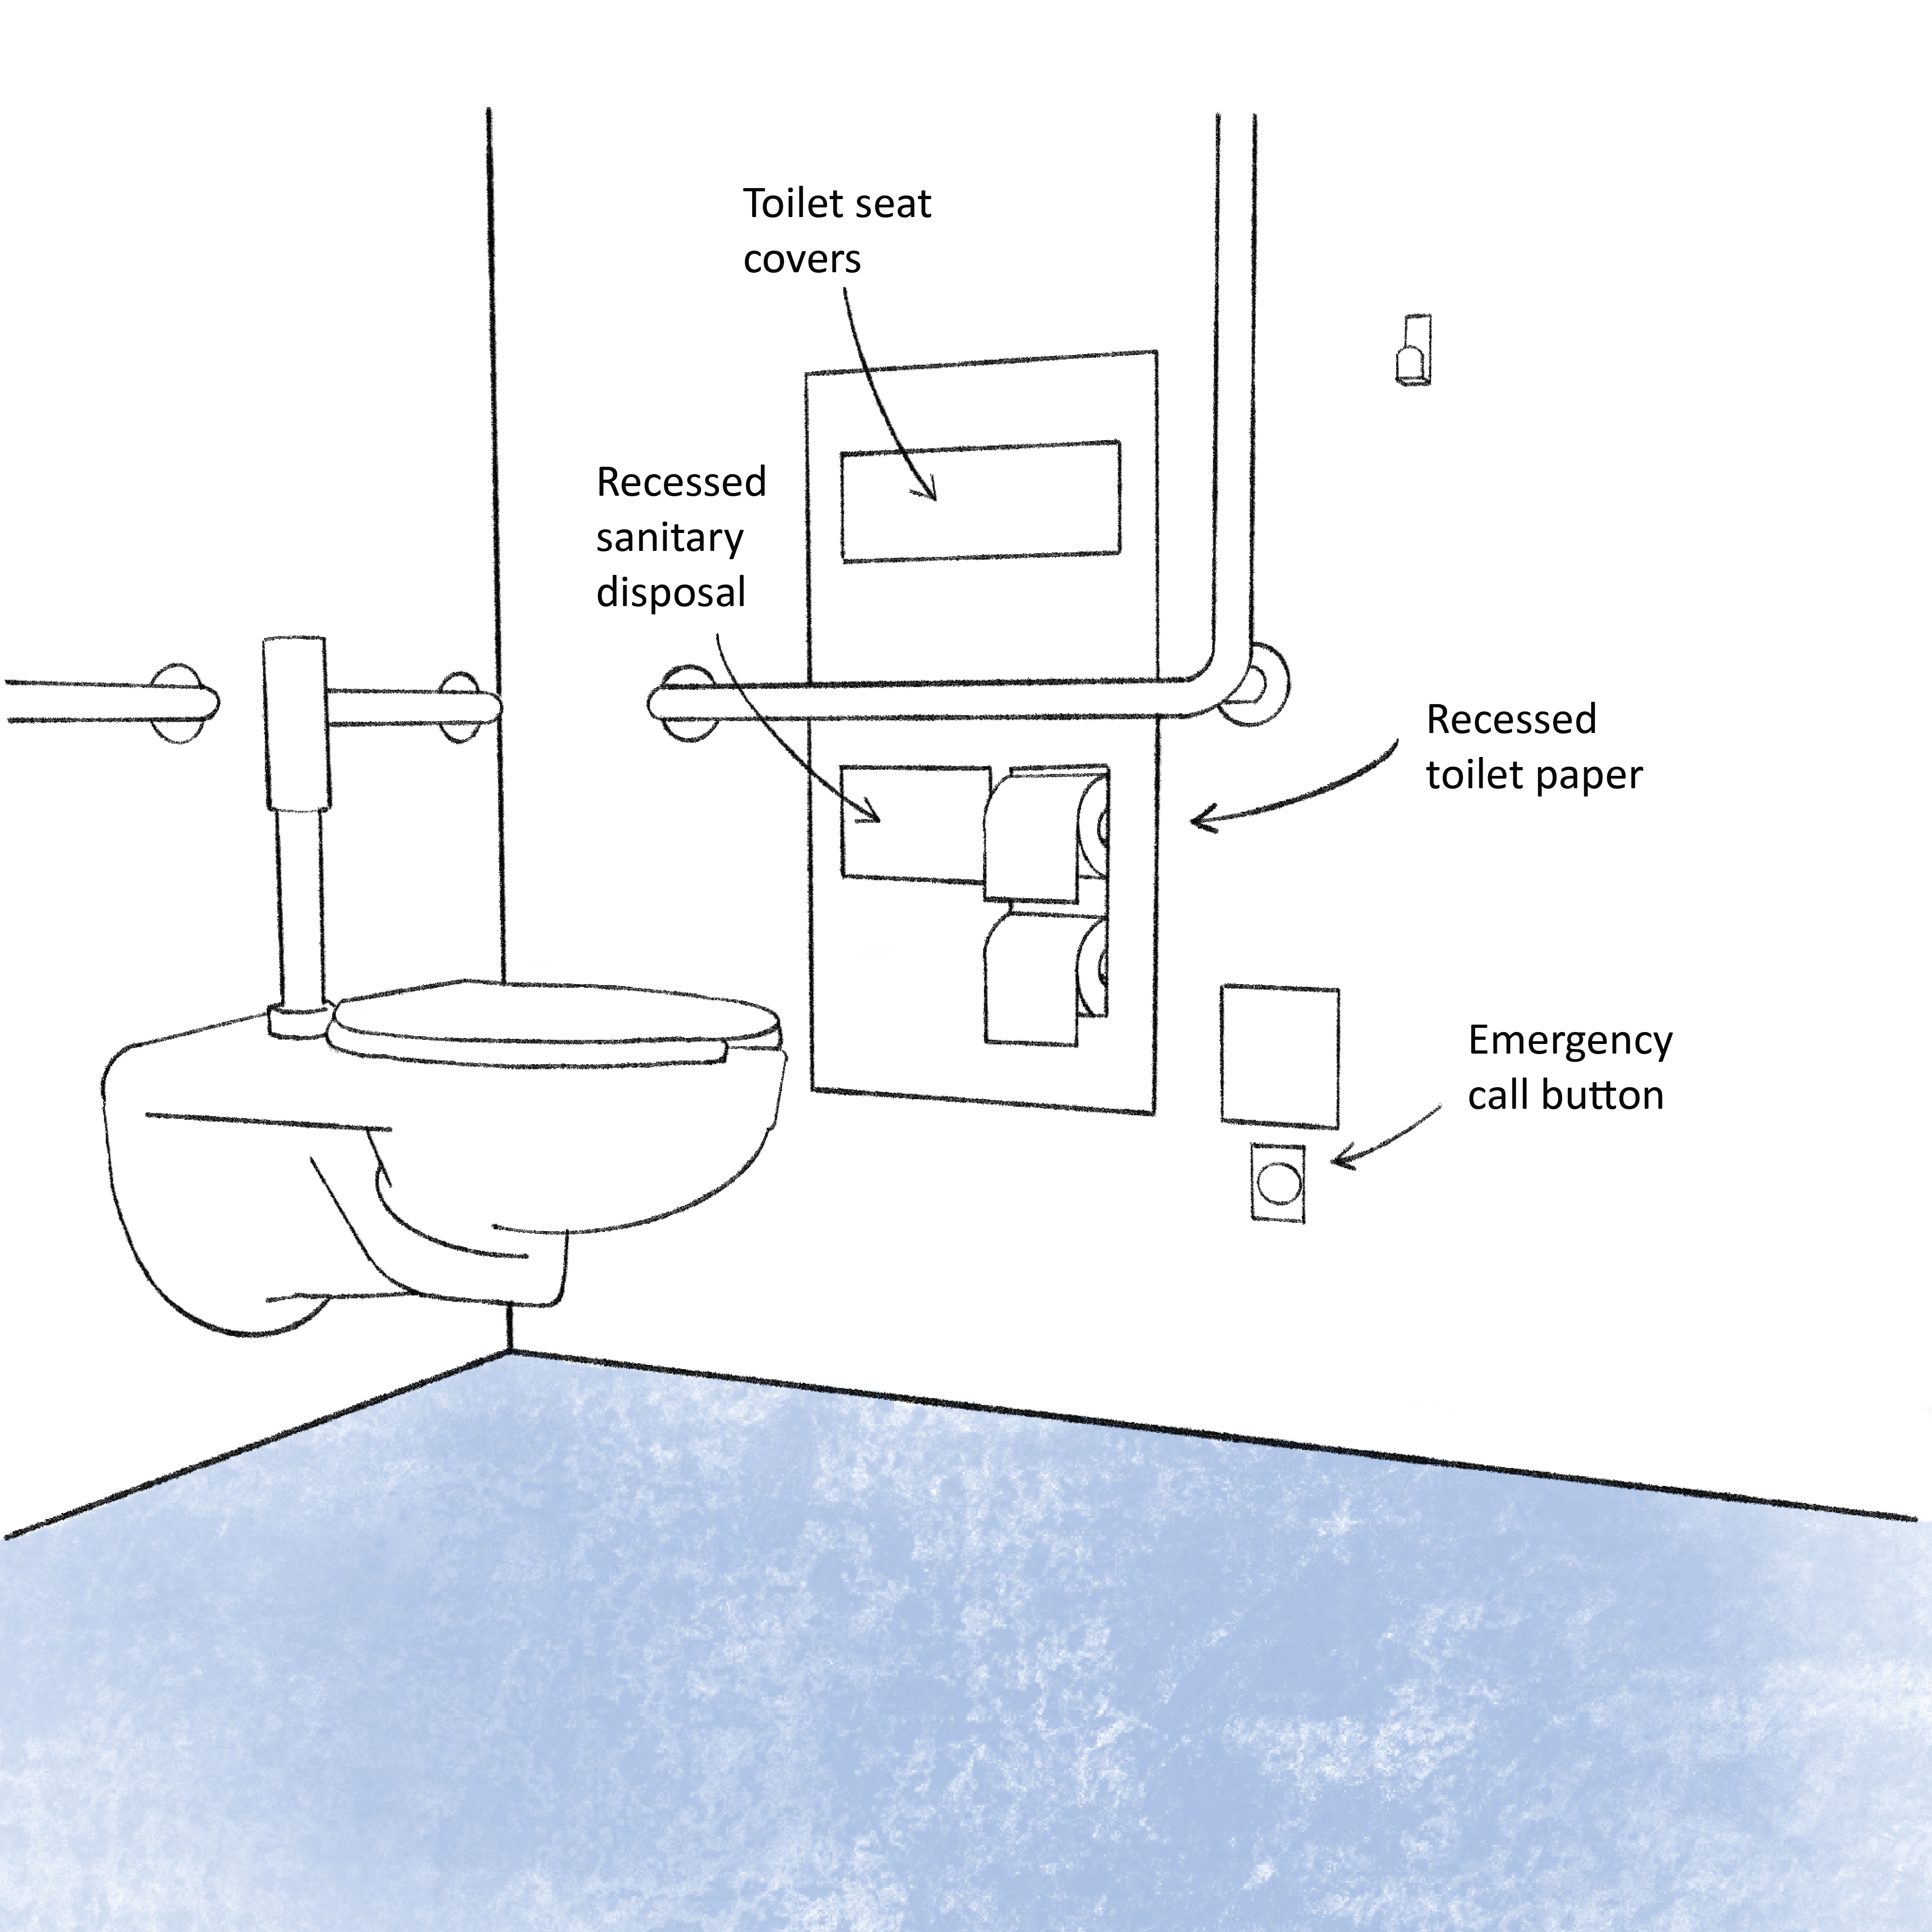 Diagrammatic hand-drawn sketch of accessible toilet setup by Jane Vorbrodt